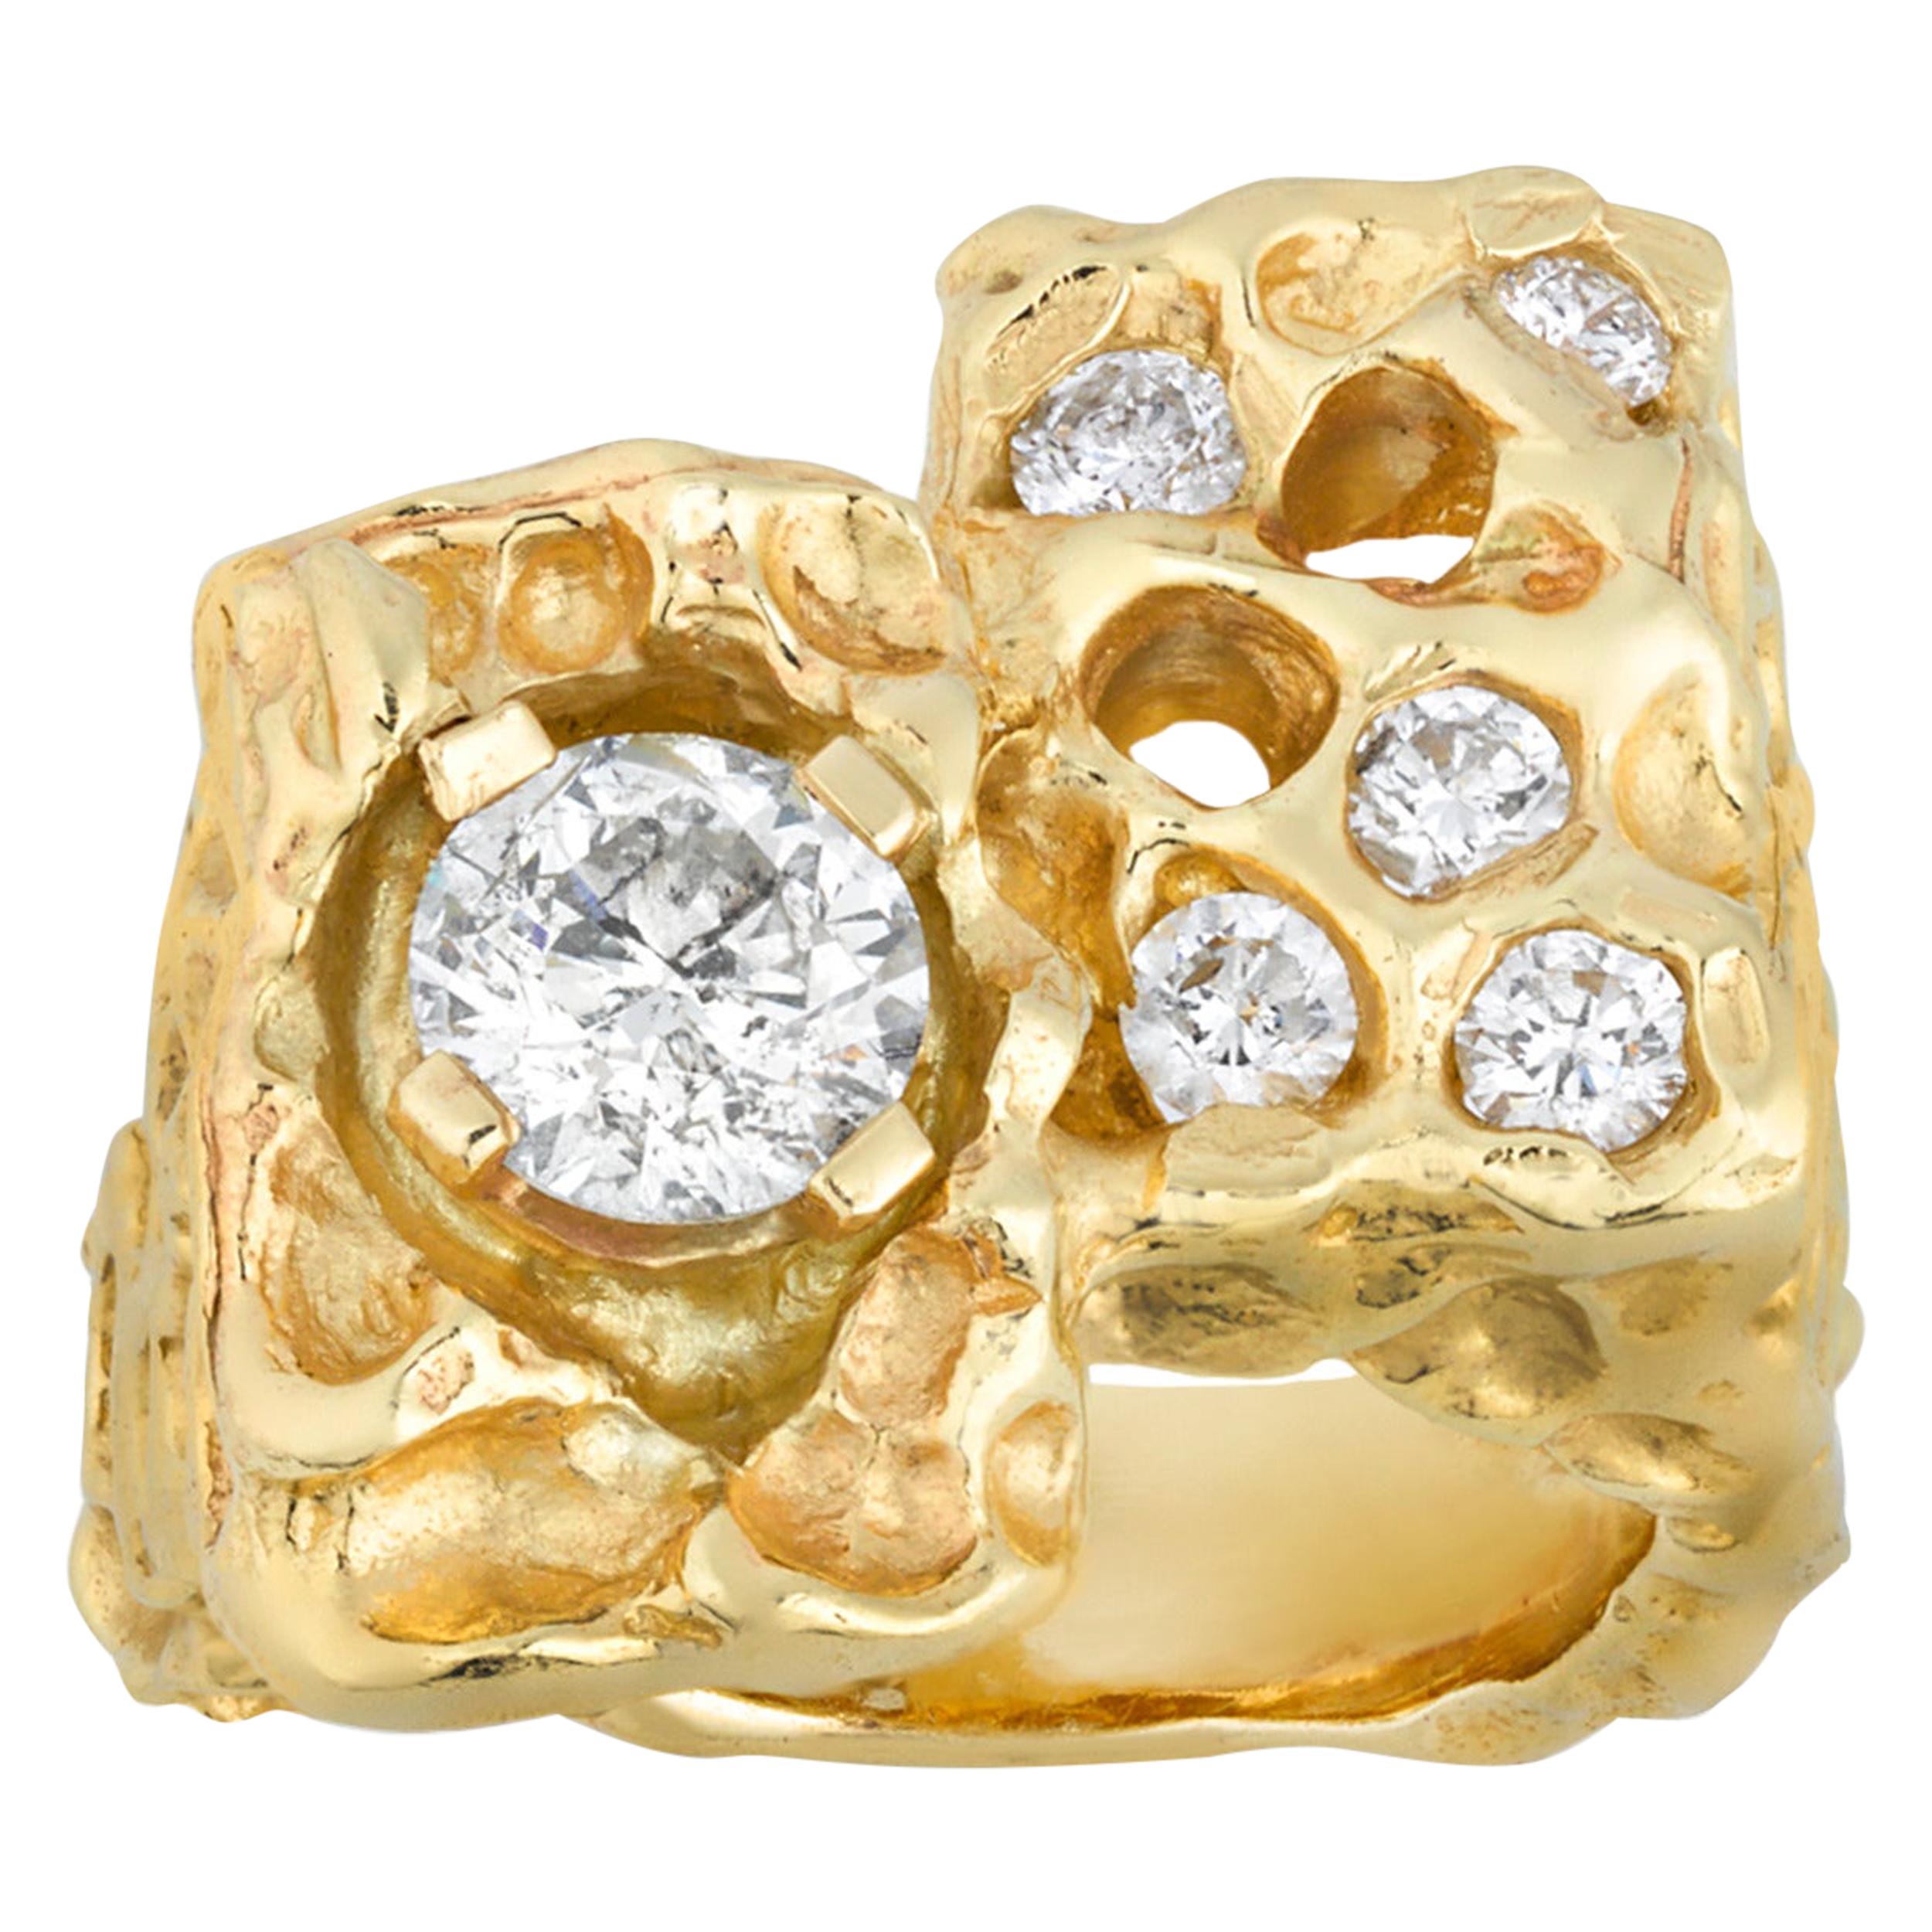 Elvis' Gold and Diamond Nugget Ring